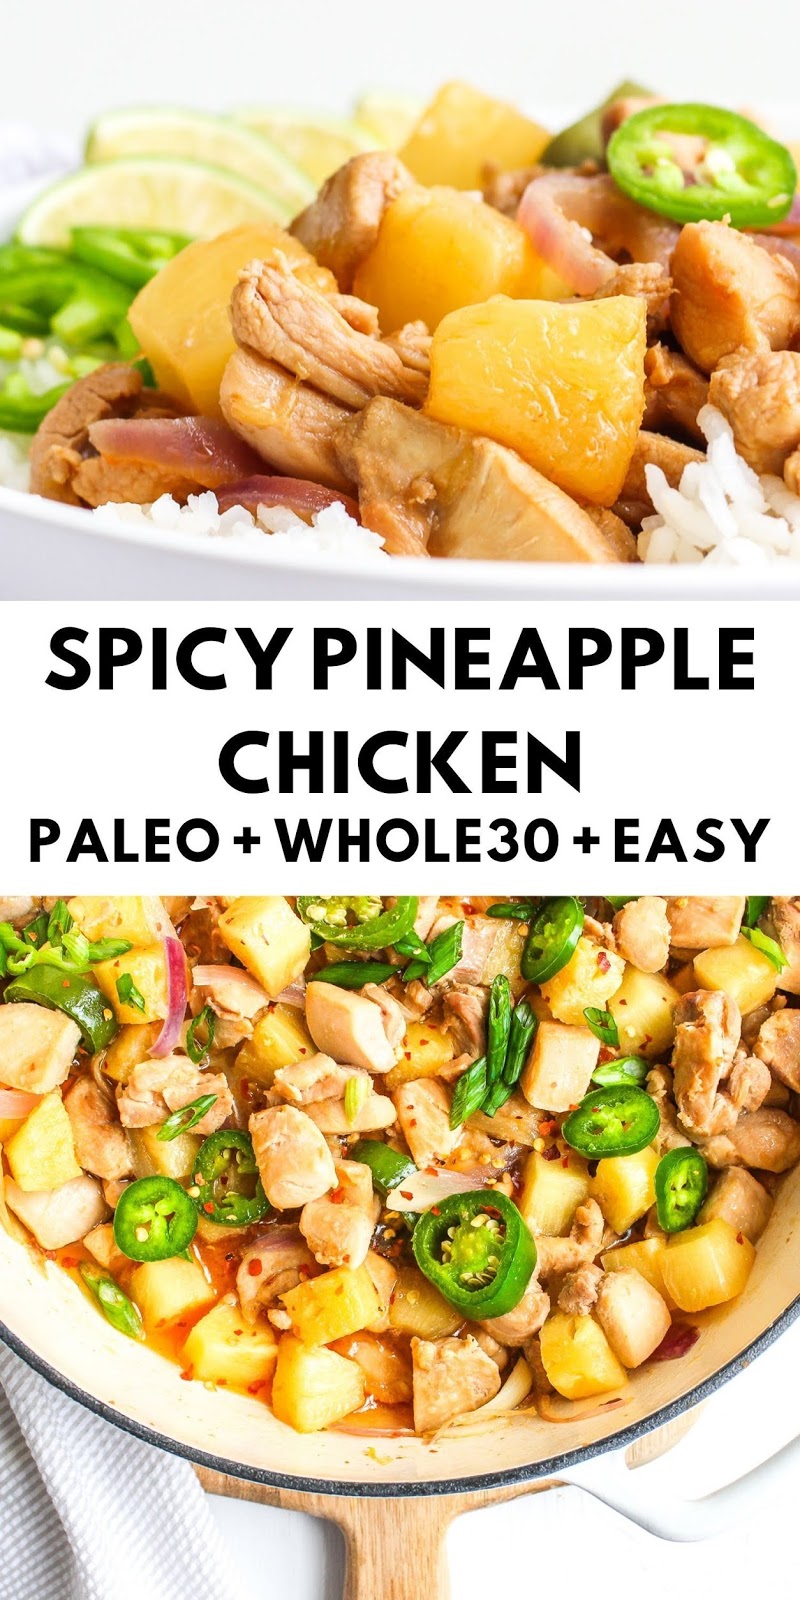 PERFECT SPICY PINEAPPLE CHICKEN 